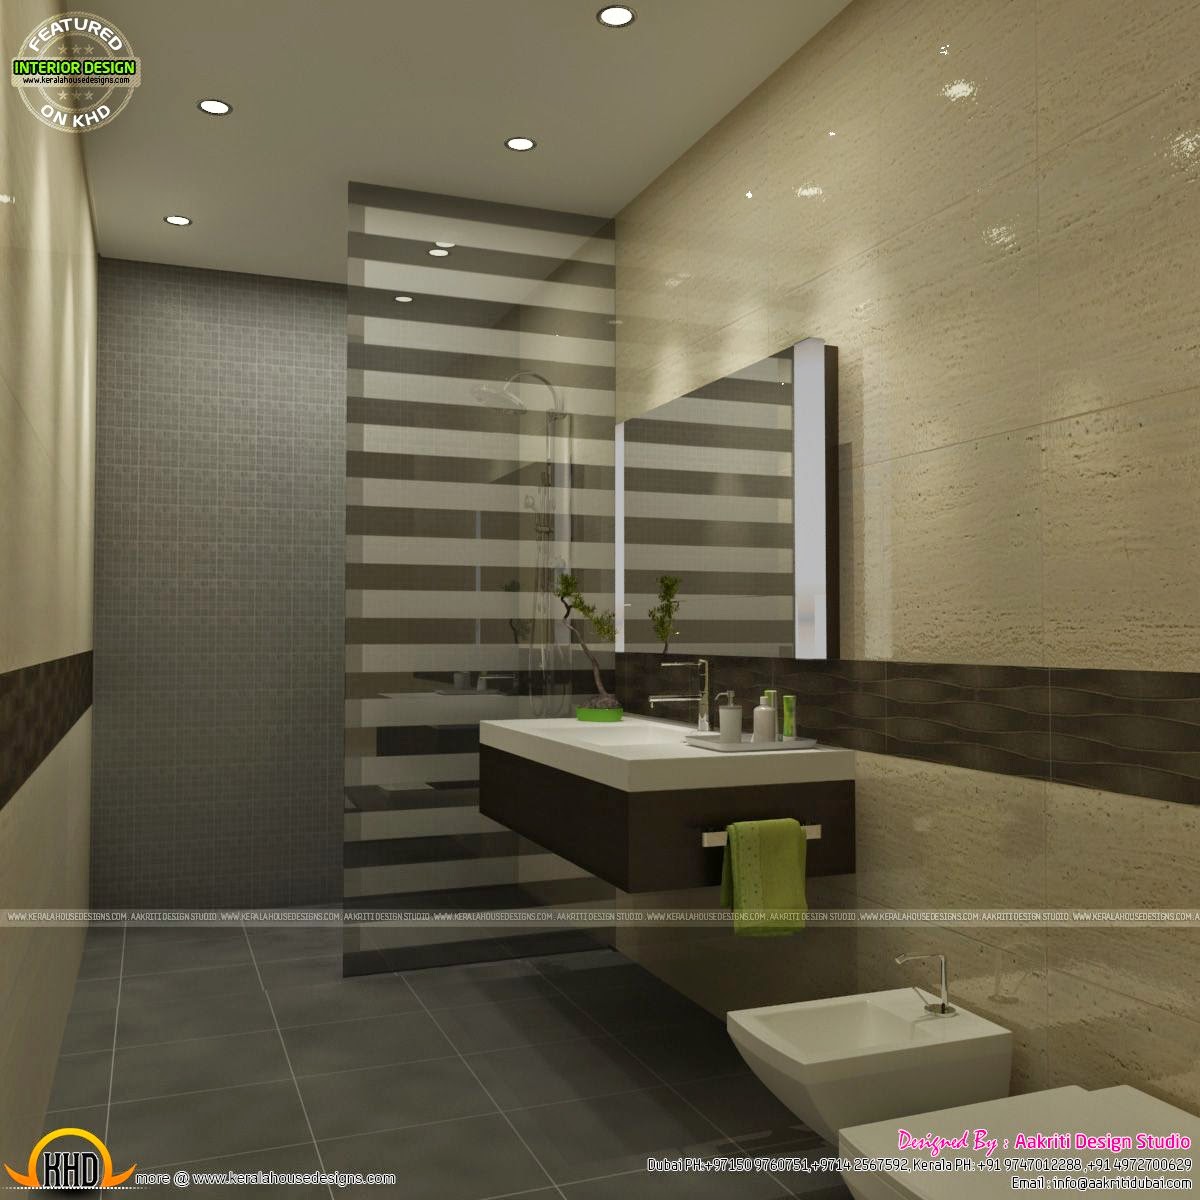 Awesome Interiors Of Living Kitchen And Bathroom Kerala Home Design And Floor Plans,South Indian Malabar Gold Necklace Designs With Price